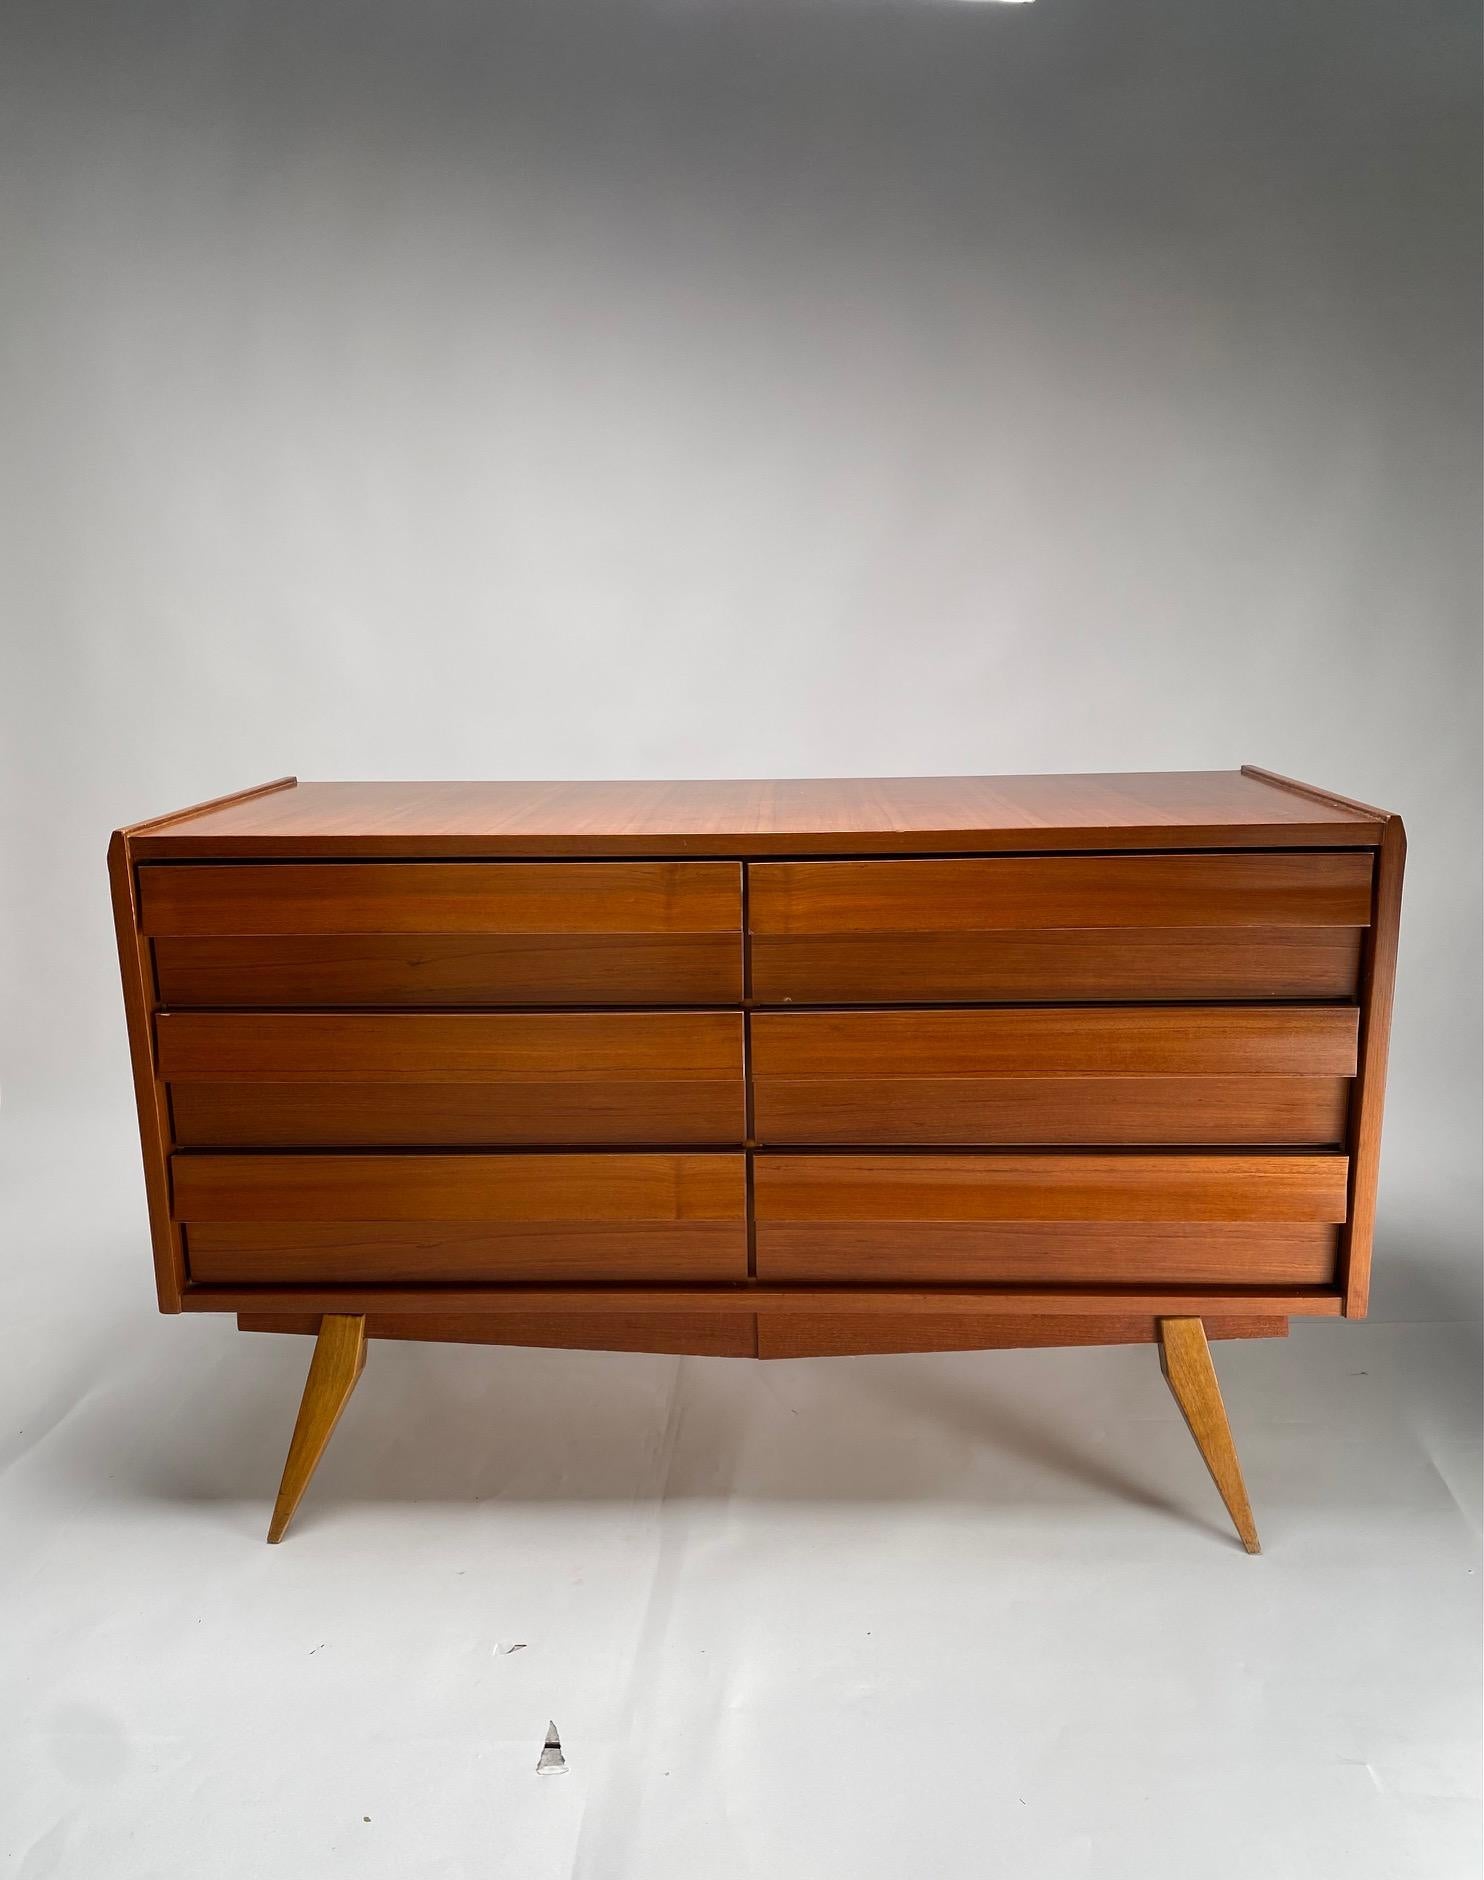 Italian Mid-Century Sideboard in wood, 1950s

The elegant and compact sideboard can easily adapt to the most different living contexts